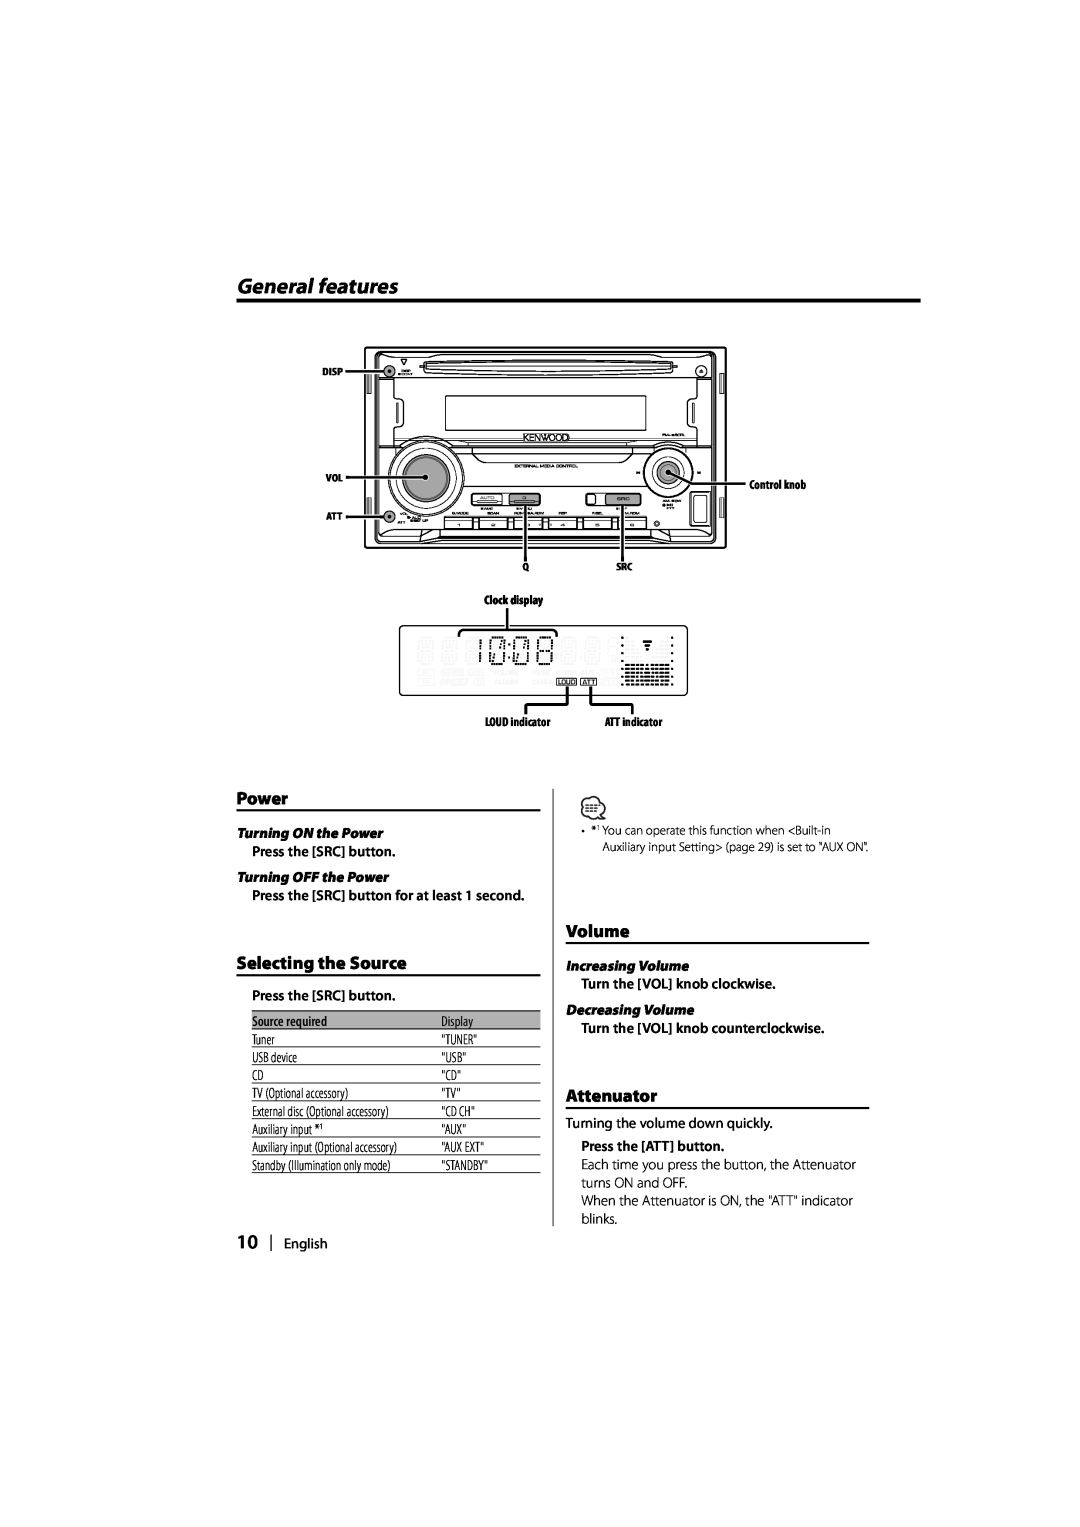 Kenwood DPX-MP2090U instruction manual General features, Selecting the Source, Volume, Attenuator, Turning ON the Power 